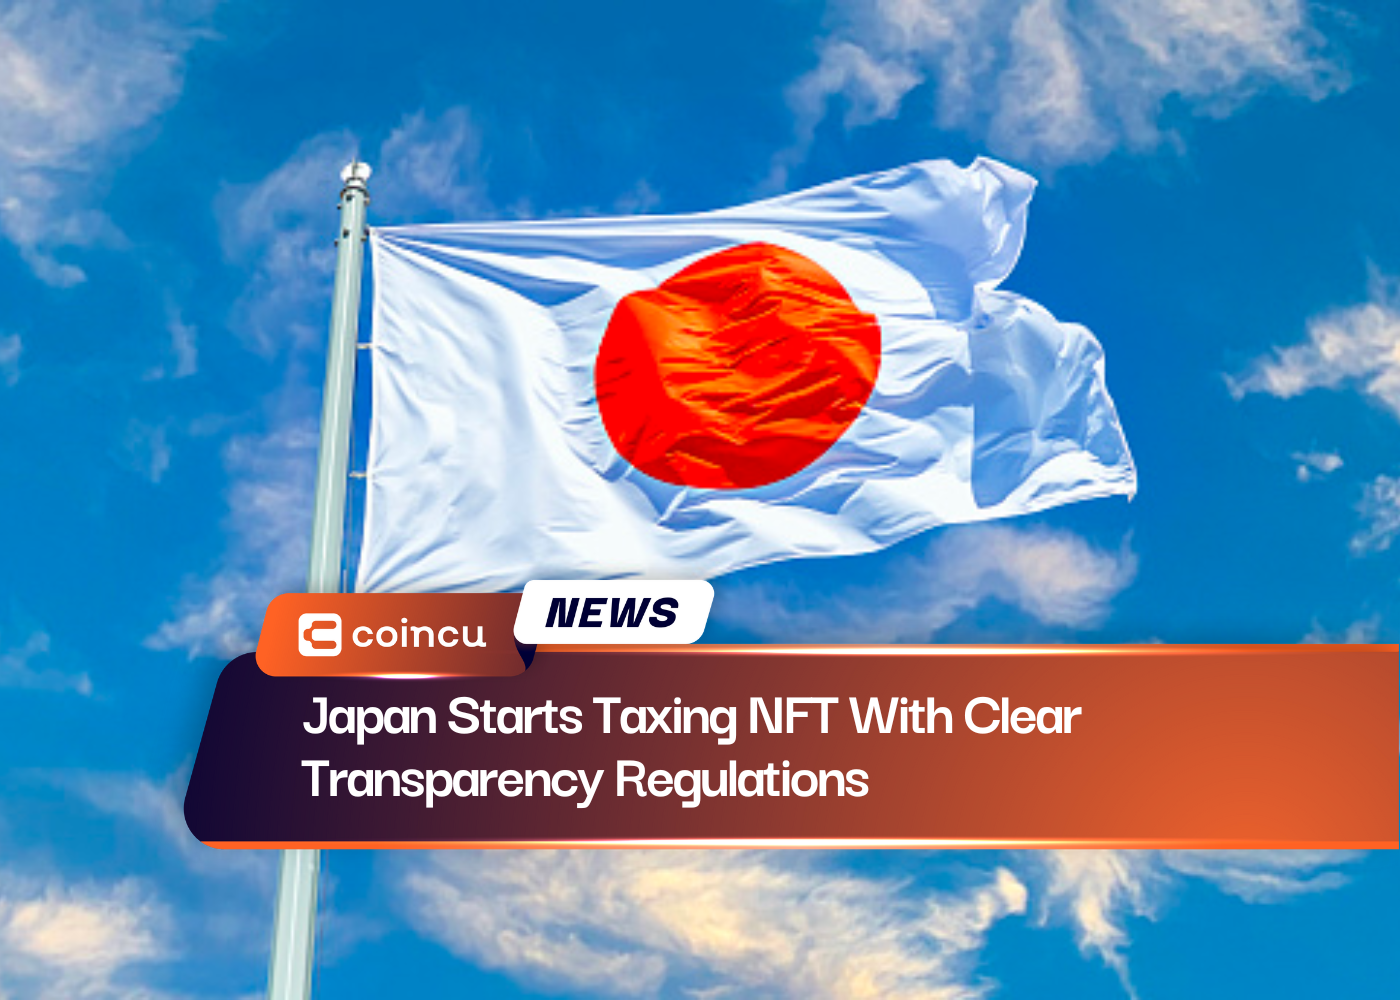 Japan Starts Taxing NFT With Clear Transparency Regulations